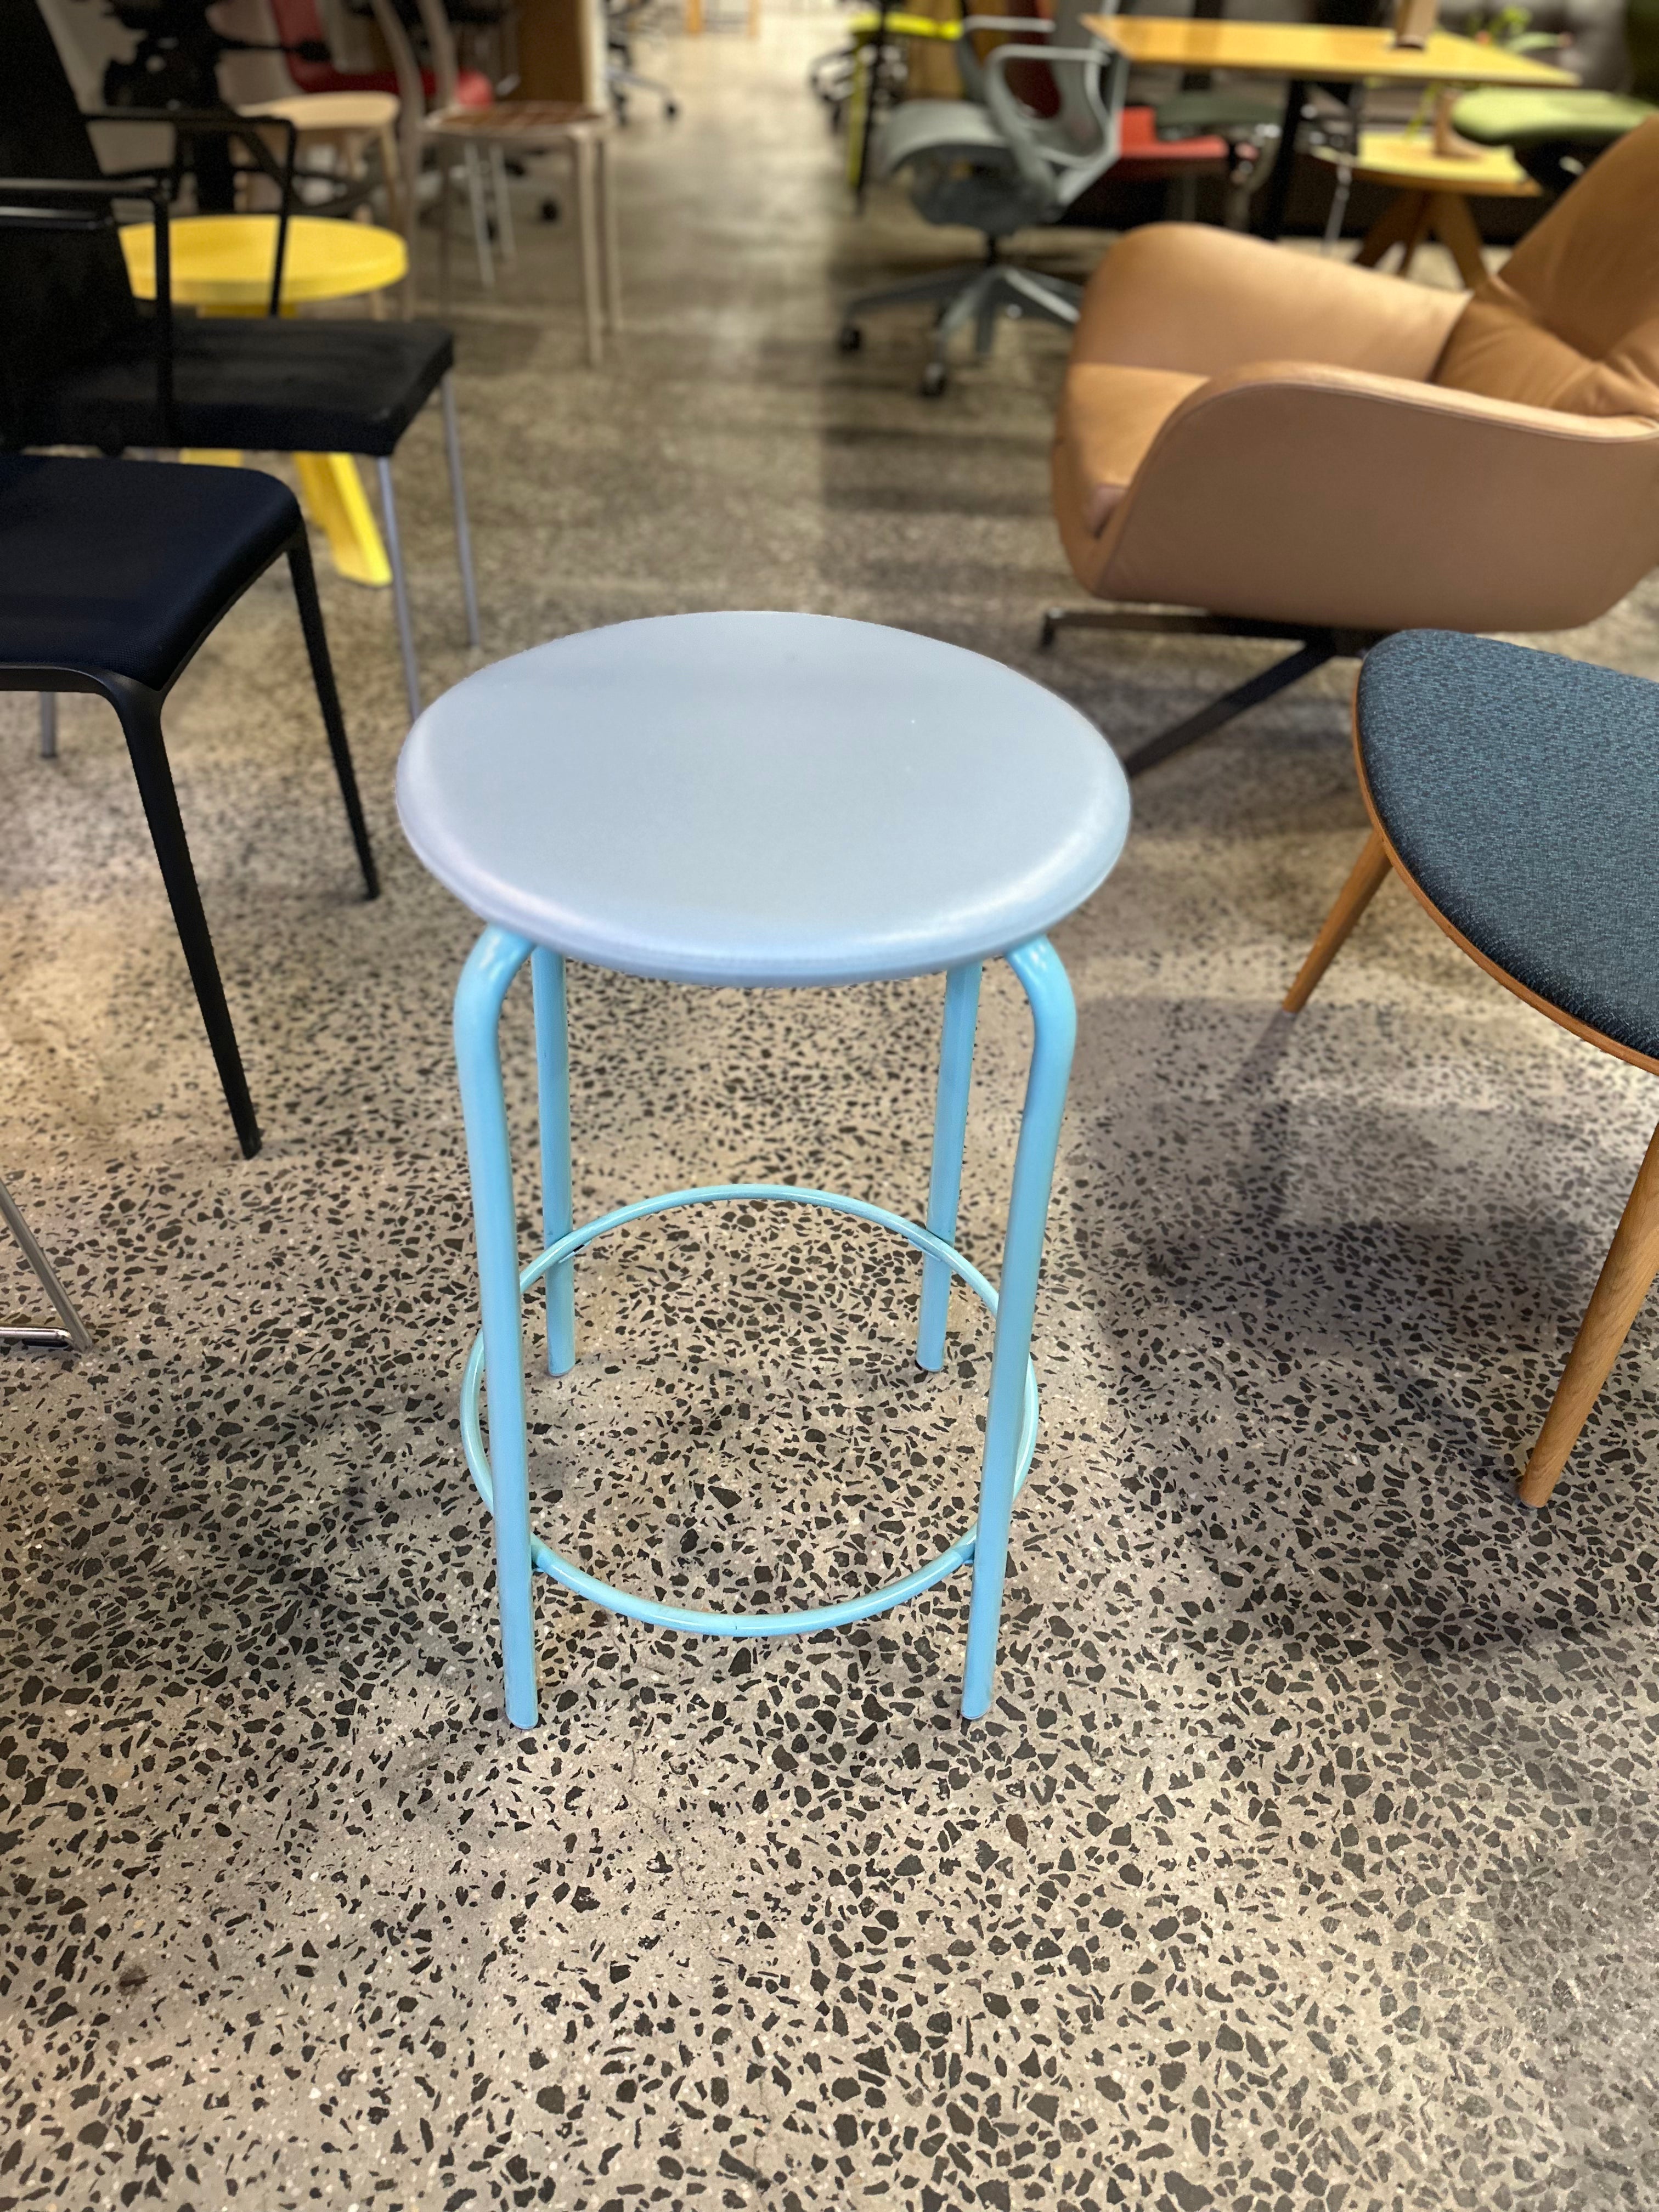 Original Frisbee Chairs Bar Stool High Chair from Kinnarps Made in Sweden Scandi Scandinavian MCM retro vintage turquoise Skyblue Blue High Standing Chair Designer Furniture Melbourne Australia Chairhub Classic Modern Pop Quality Seating